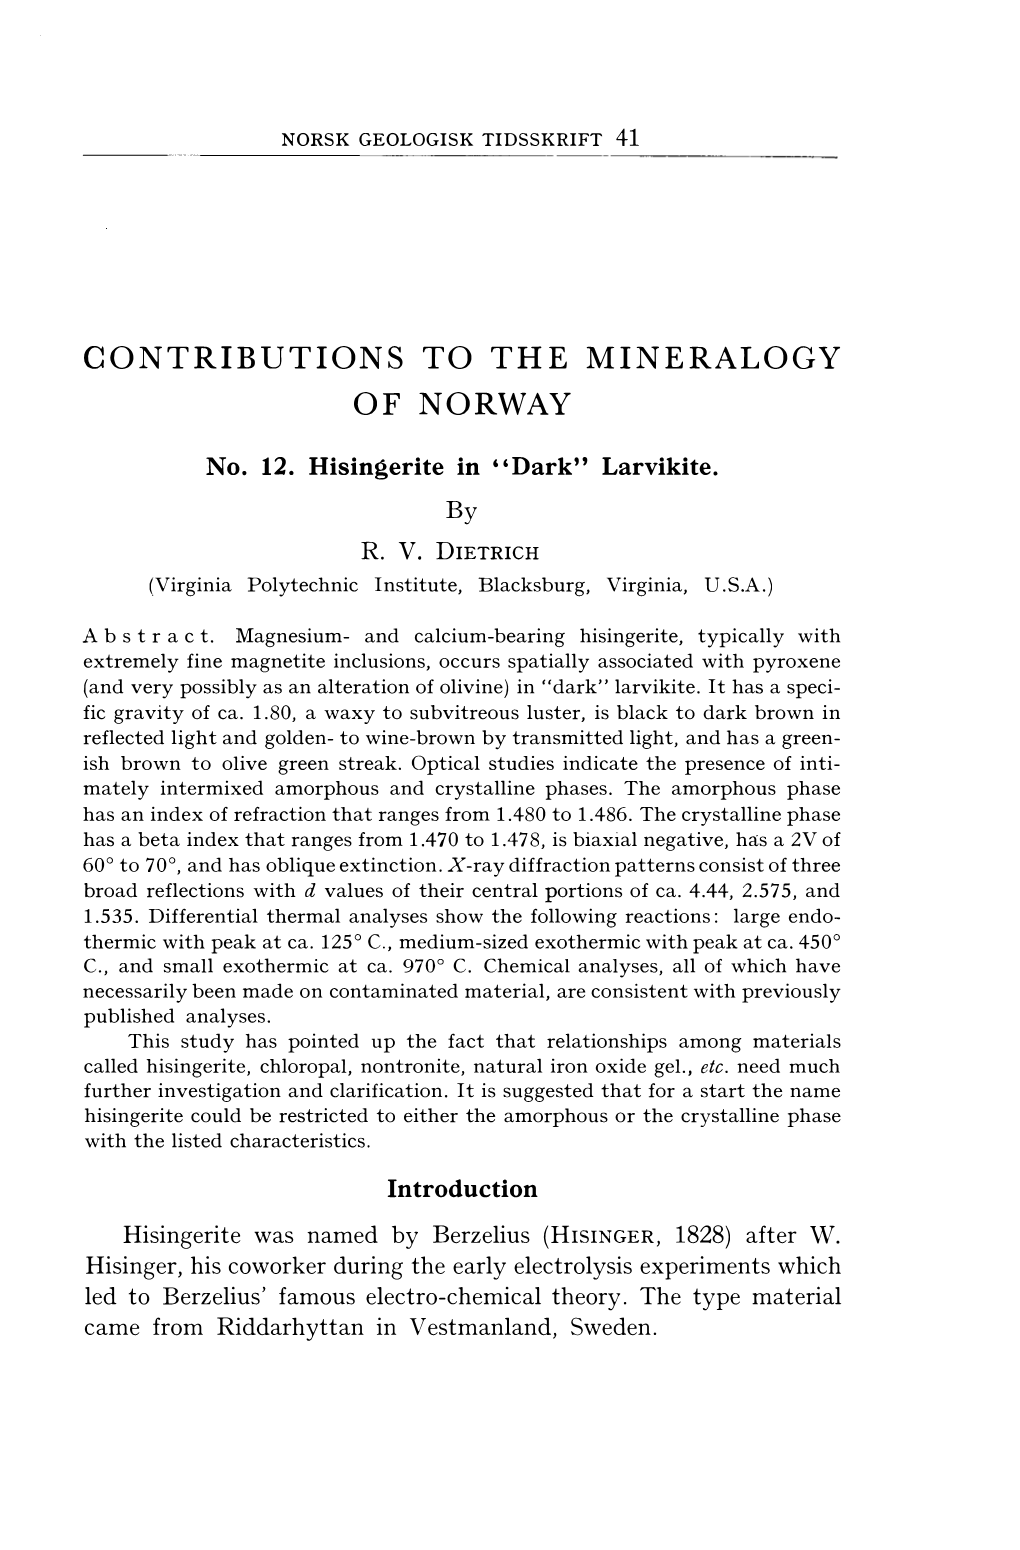 41 CONTRIBUTIONS to the MINERALOGY of NORWAY By